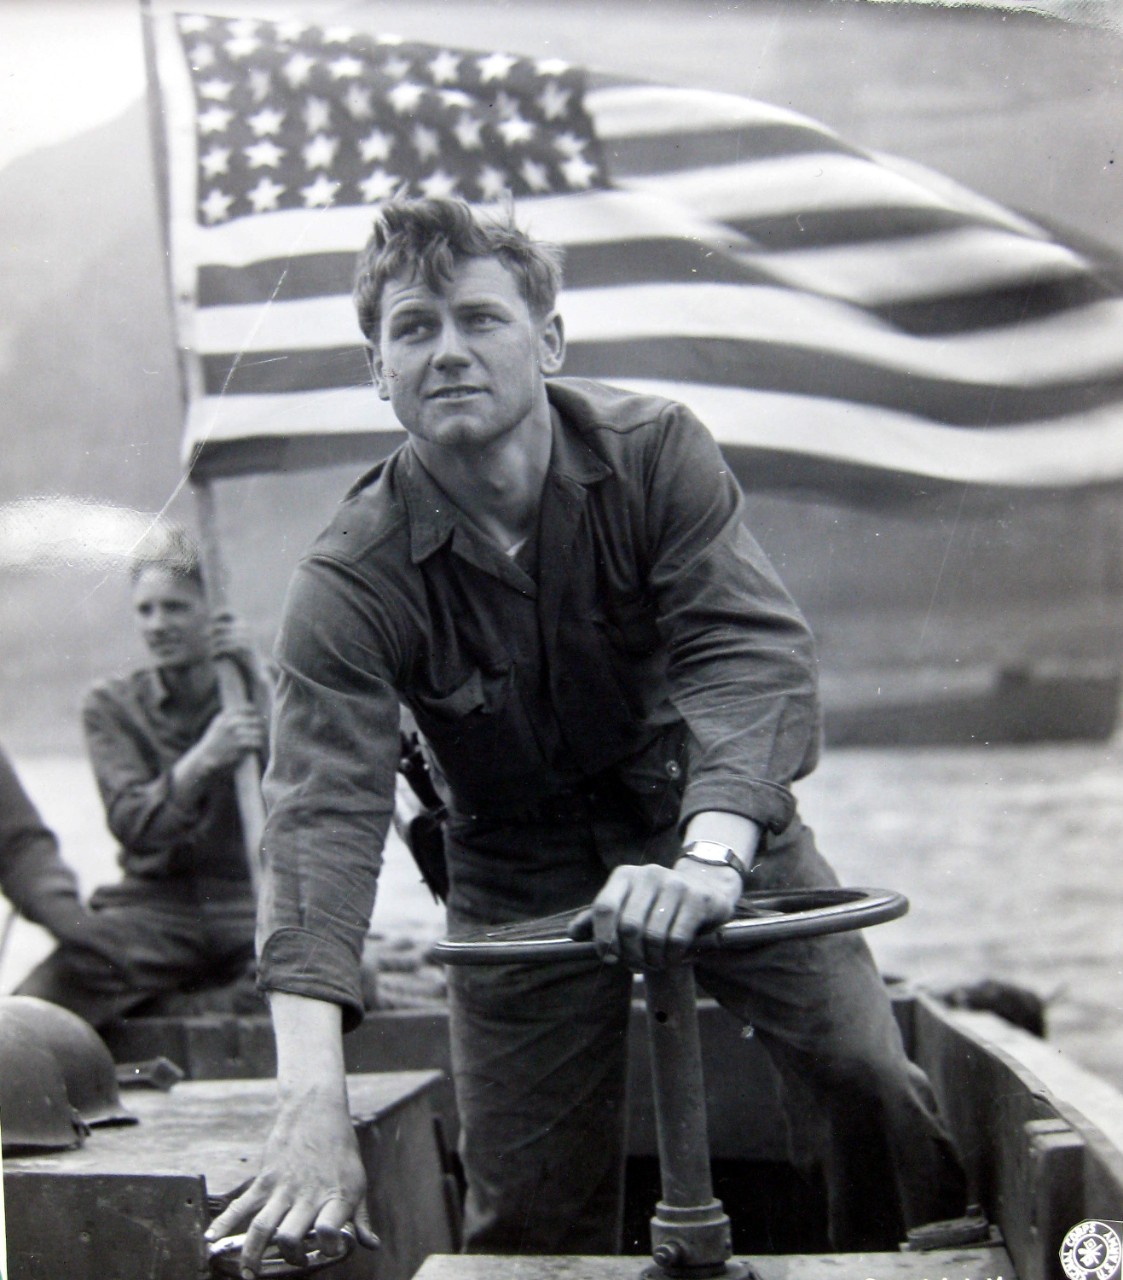 With the American flag flying over his head, Motor Machinist’s Mate Robert Mooty, USN, ferries troops across the Rhine River at Oberwesel, Germany.